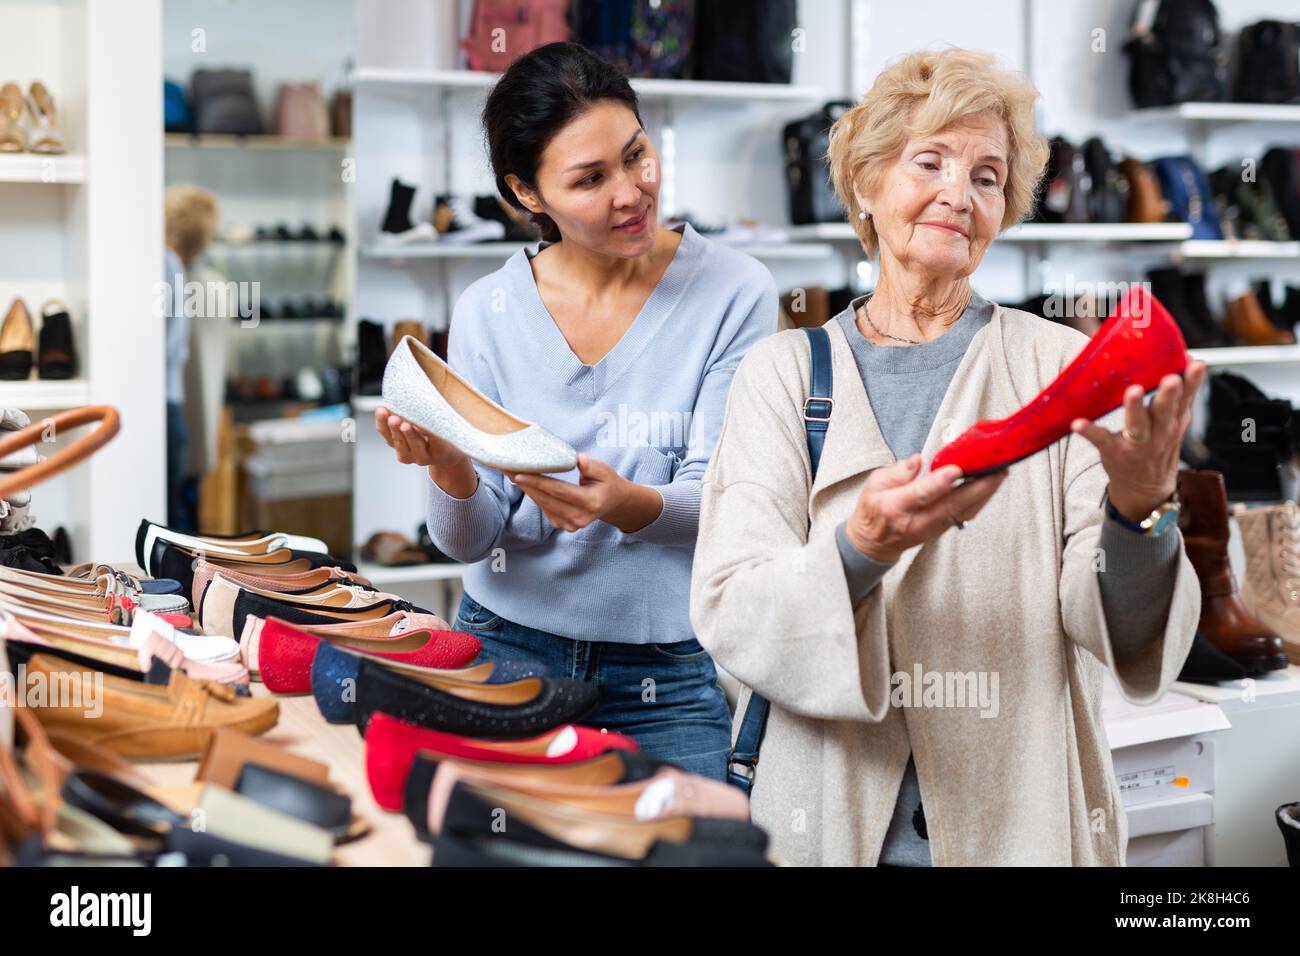 Saleswoman helping granny to select new shoes Stock Photo